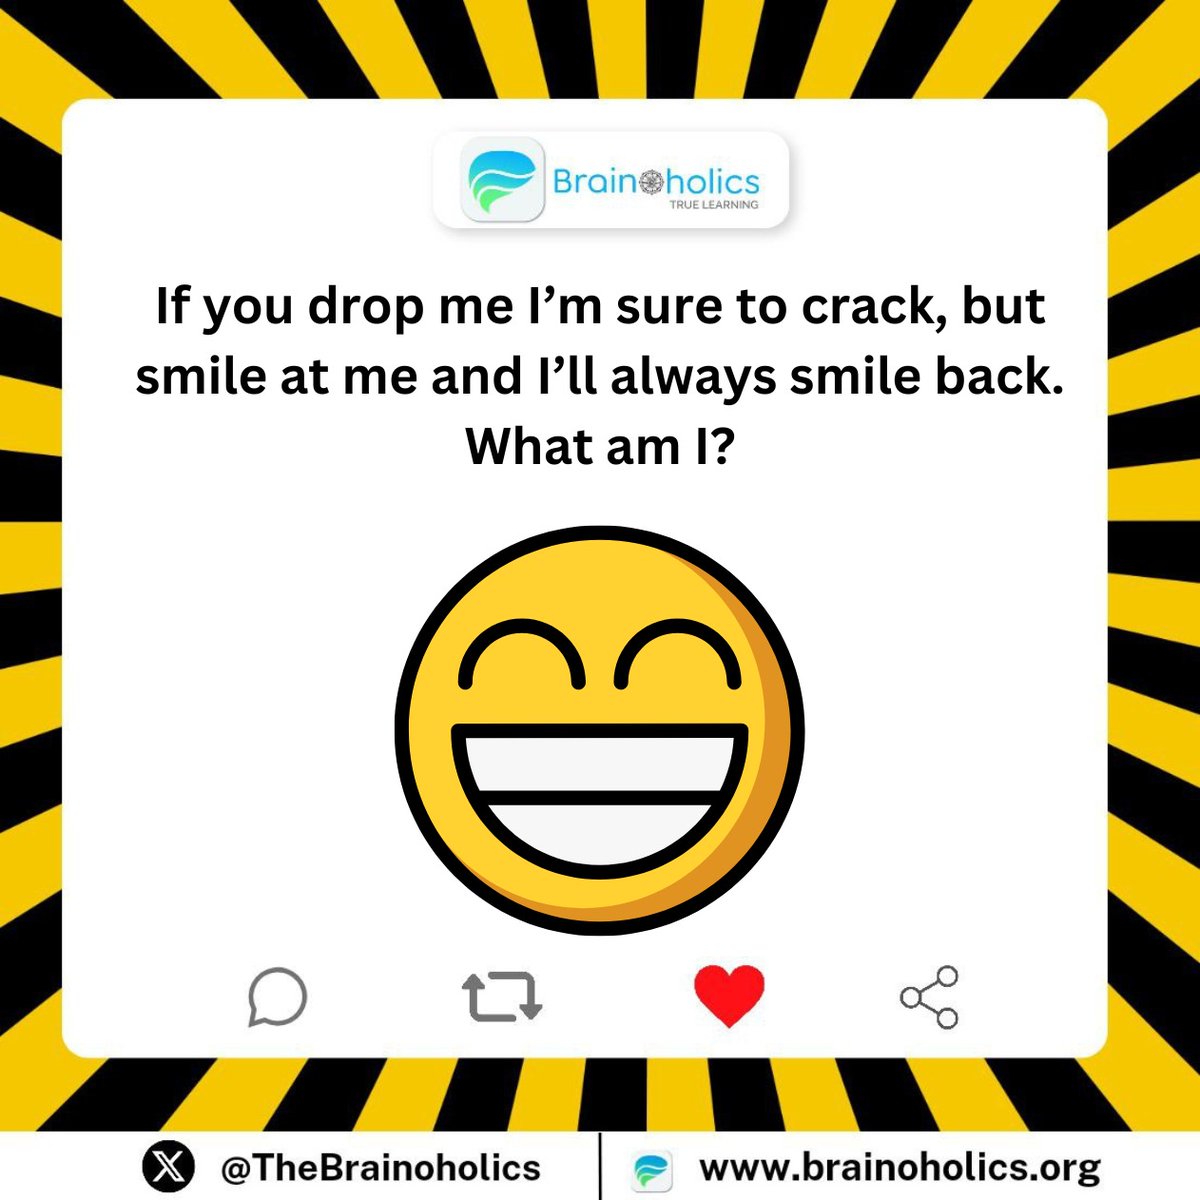 Can you crack this smiley quiz?! 😏 
#CreativityUnleashed #ThoughtProvoking #InnovationNation #BrainstormingBliss #QuizTime #ChallengeAccepted #MindMeld #IdeasGalore #ThinkOutsideTheBox #BrainstormBrigade #patiswiss #ElClasico #LILIES𓆸 #ไบร์ทเนเน่ #bbtvi #QueenOfTears